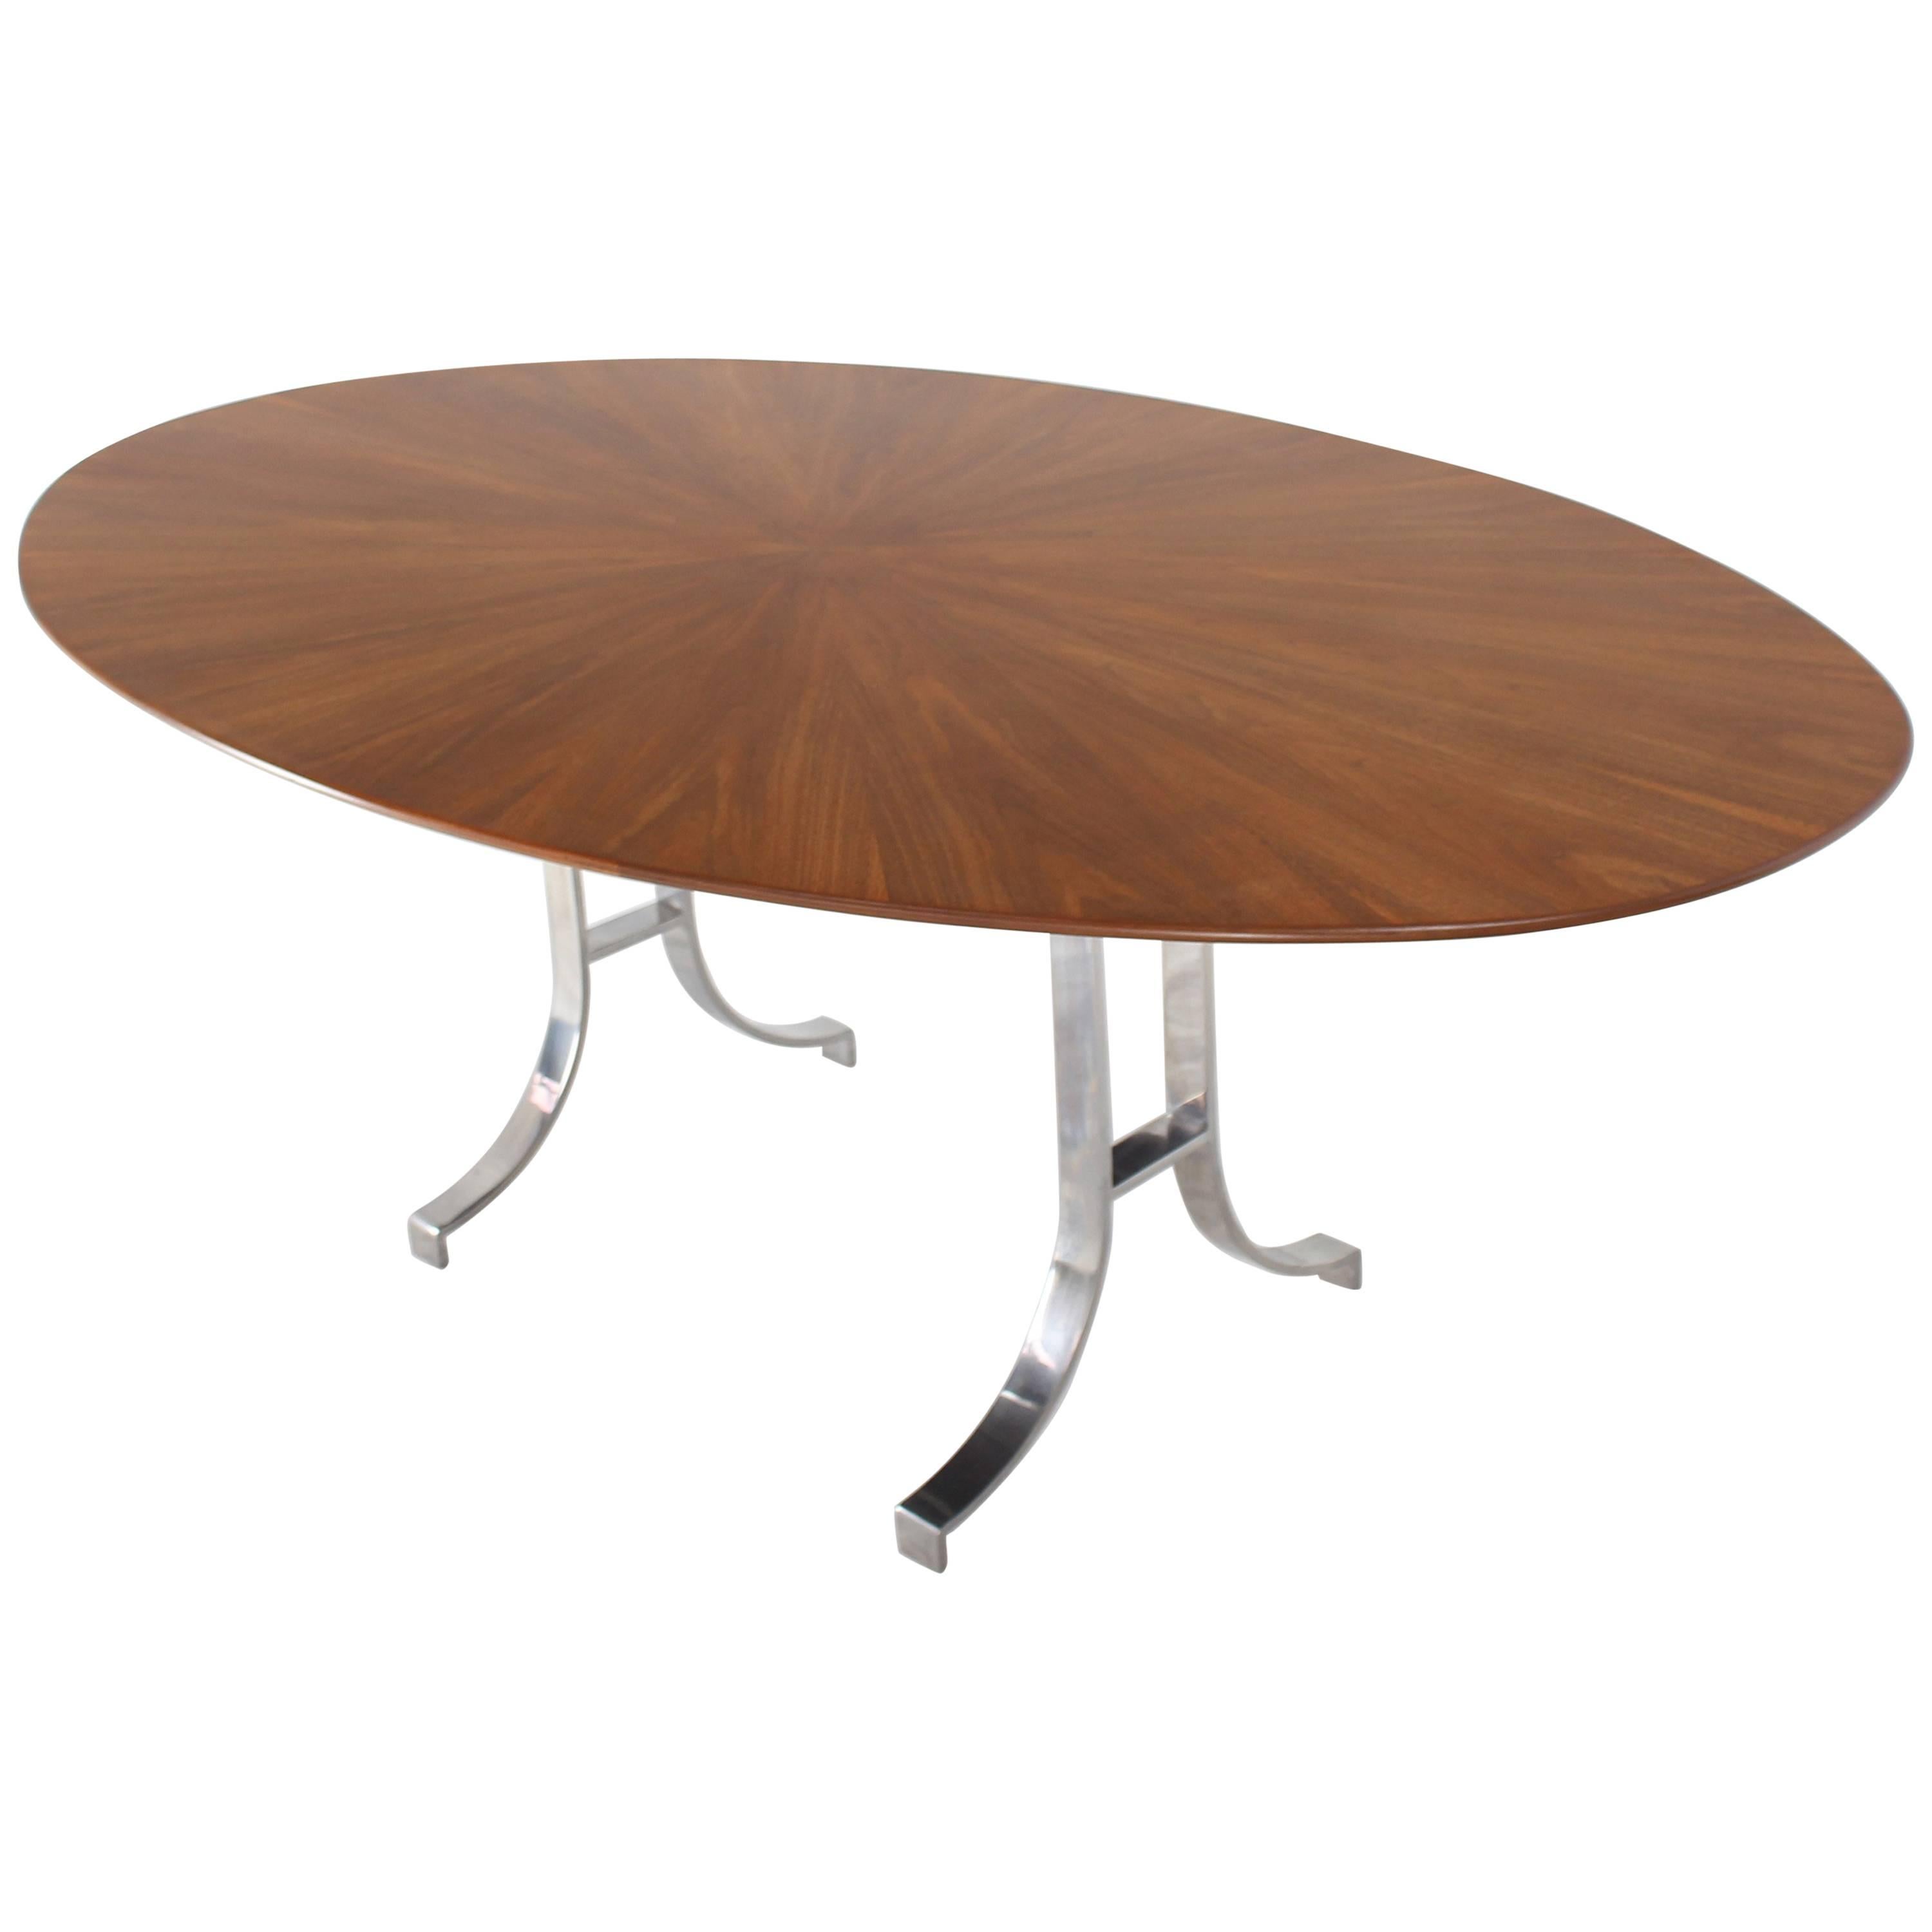 American Oval Walnut Top Stainless Steel Base Dining Conference Table